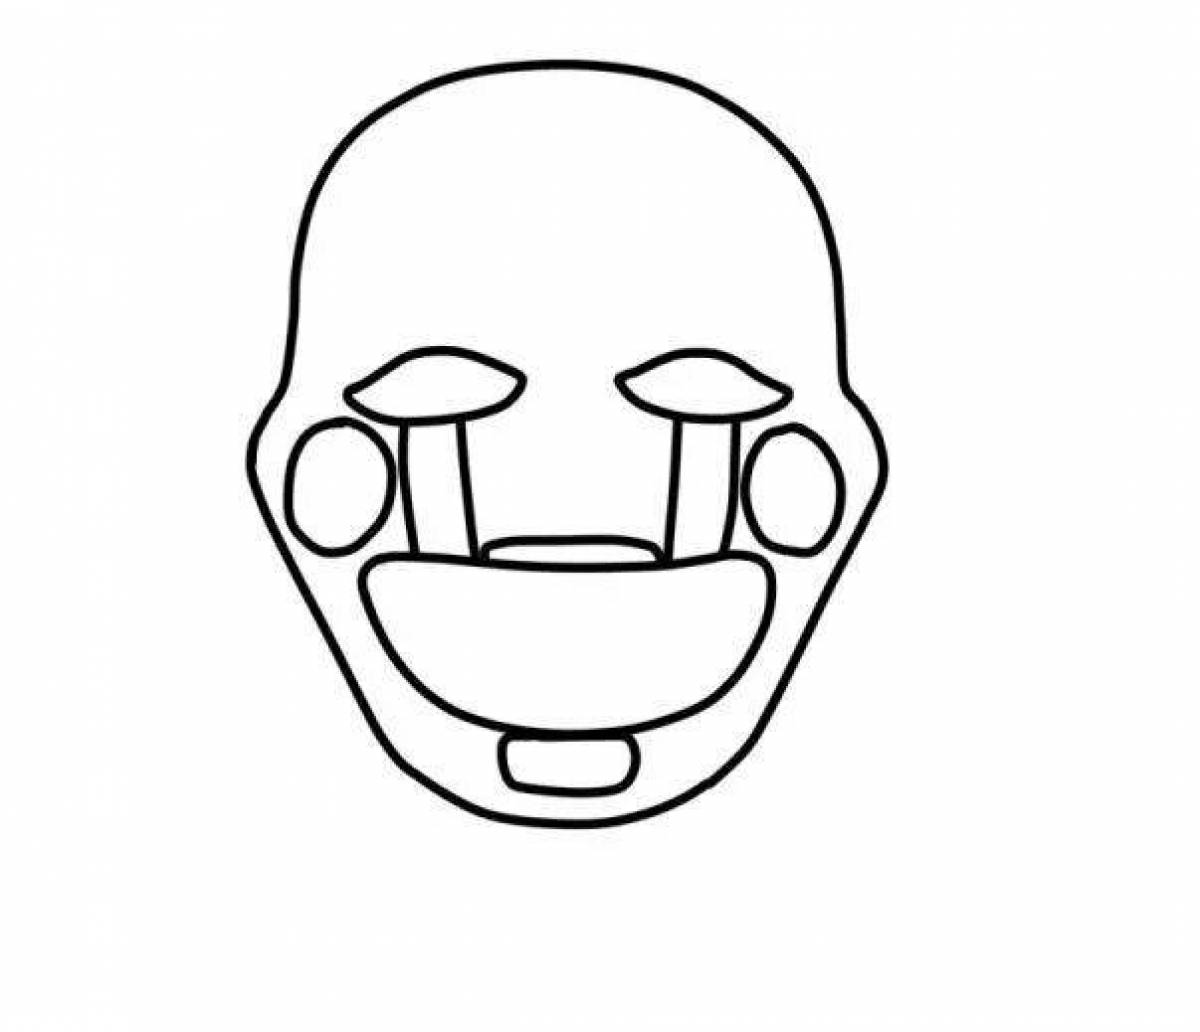 Majestic puppet fnaf coloring page